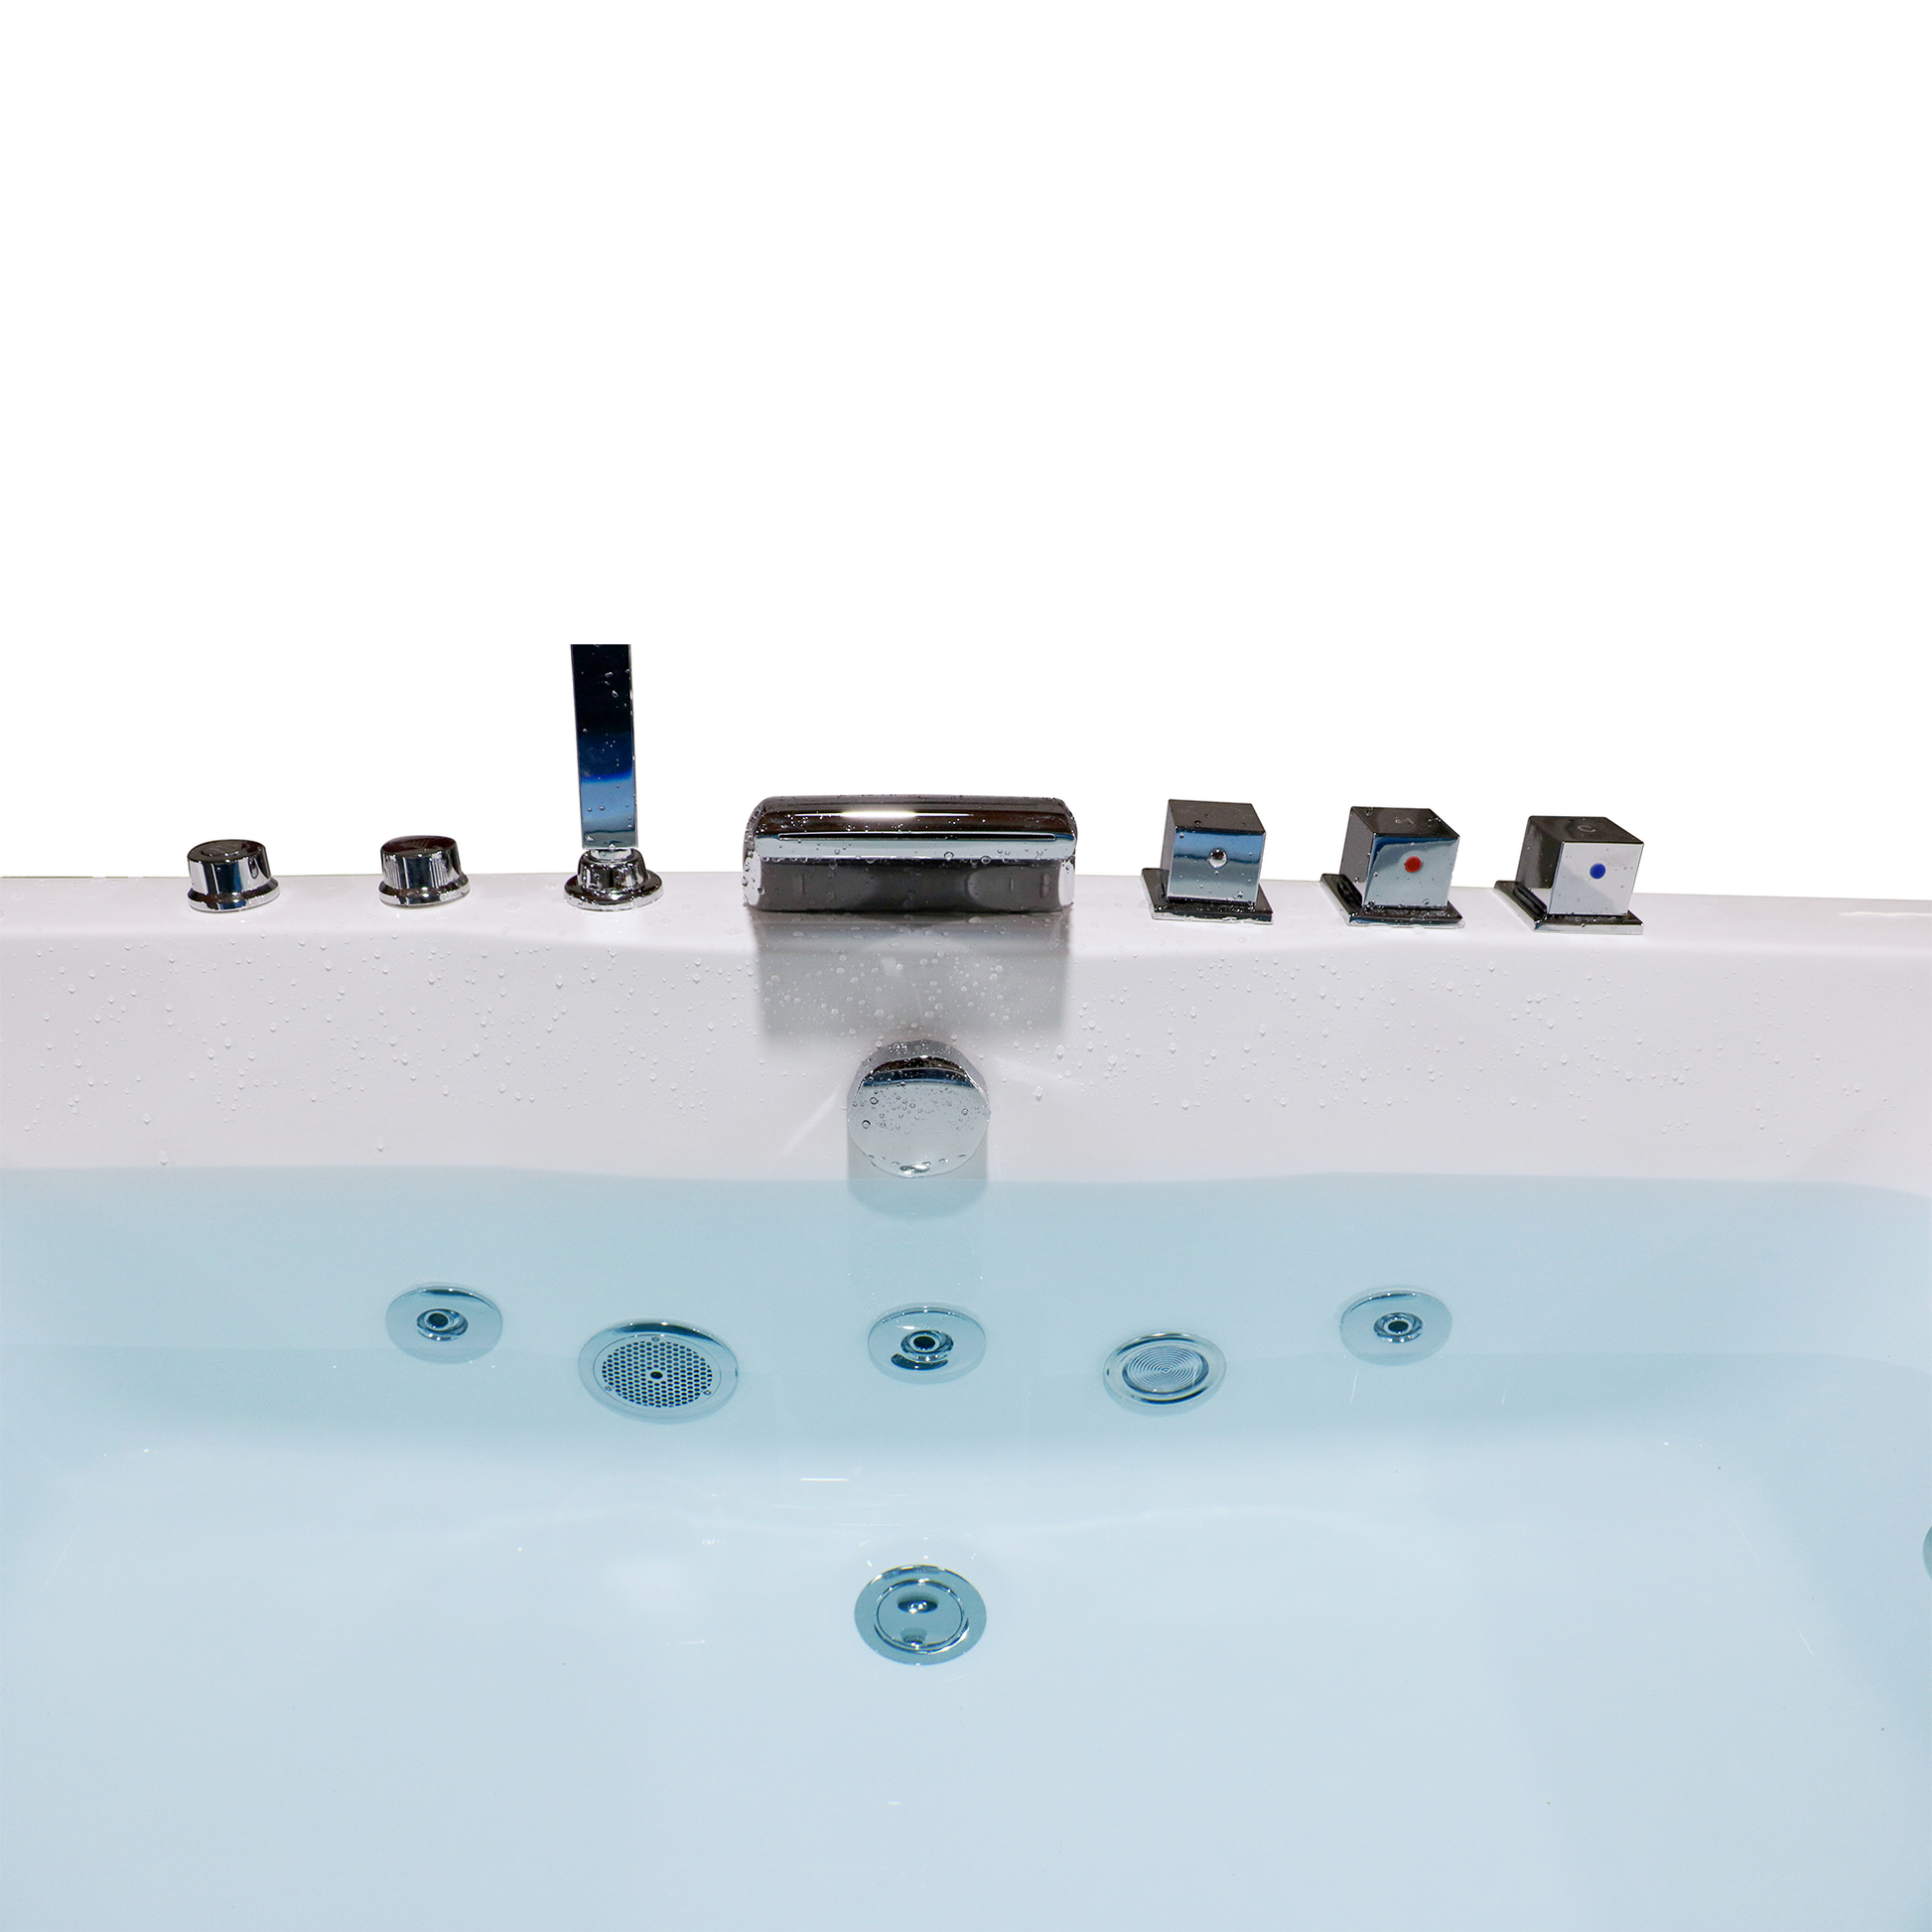 67 in. 1 Person Freestanding Whirlpool Jetted SPA Hot Tub with Chromot